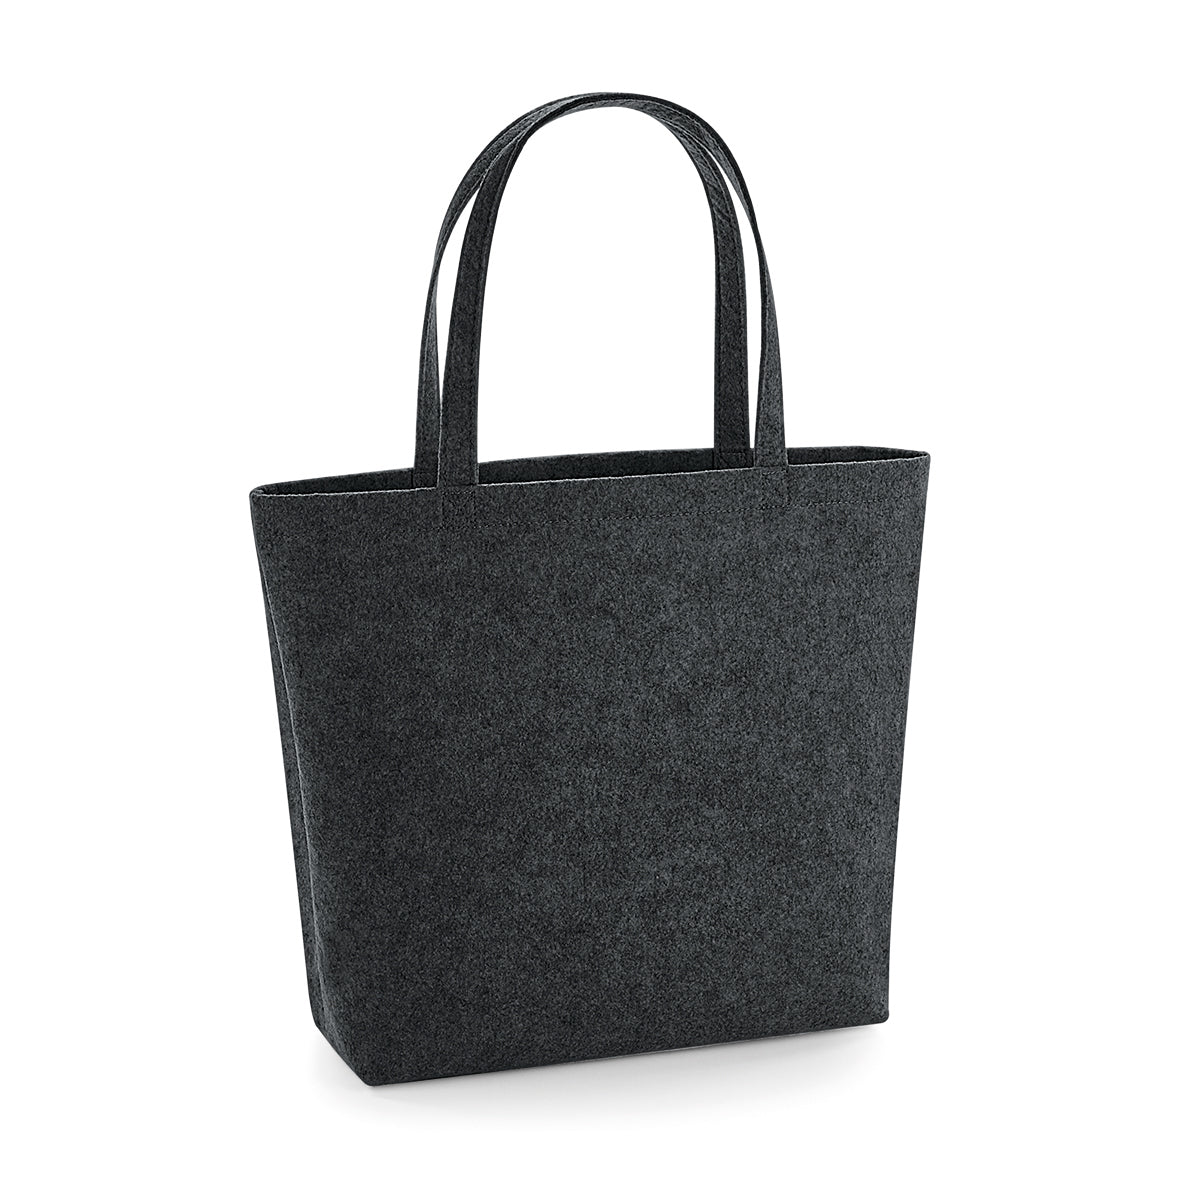 BagBase Felt Shopper/Tote BG721 | Up to 70% Discount on Brands ...